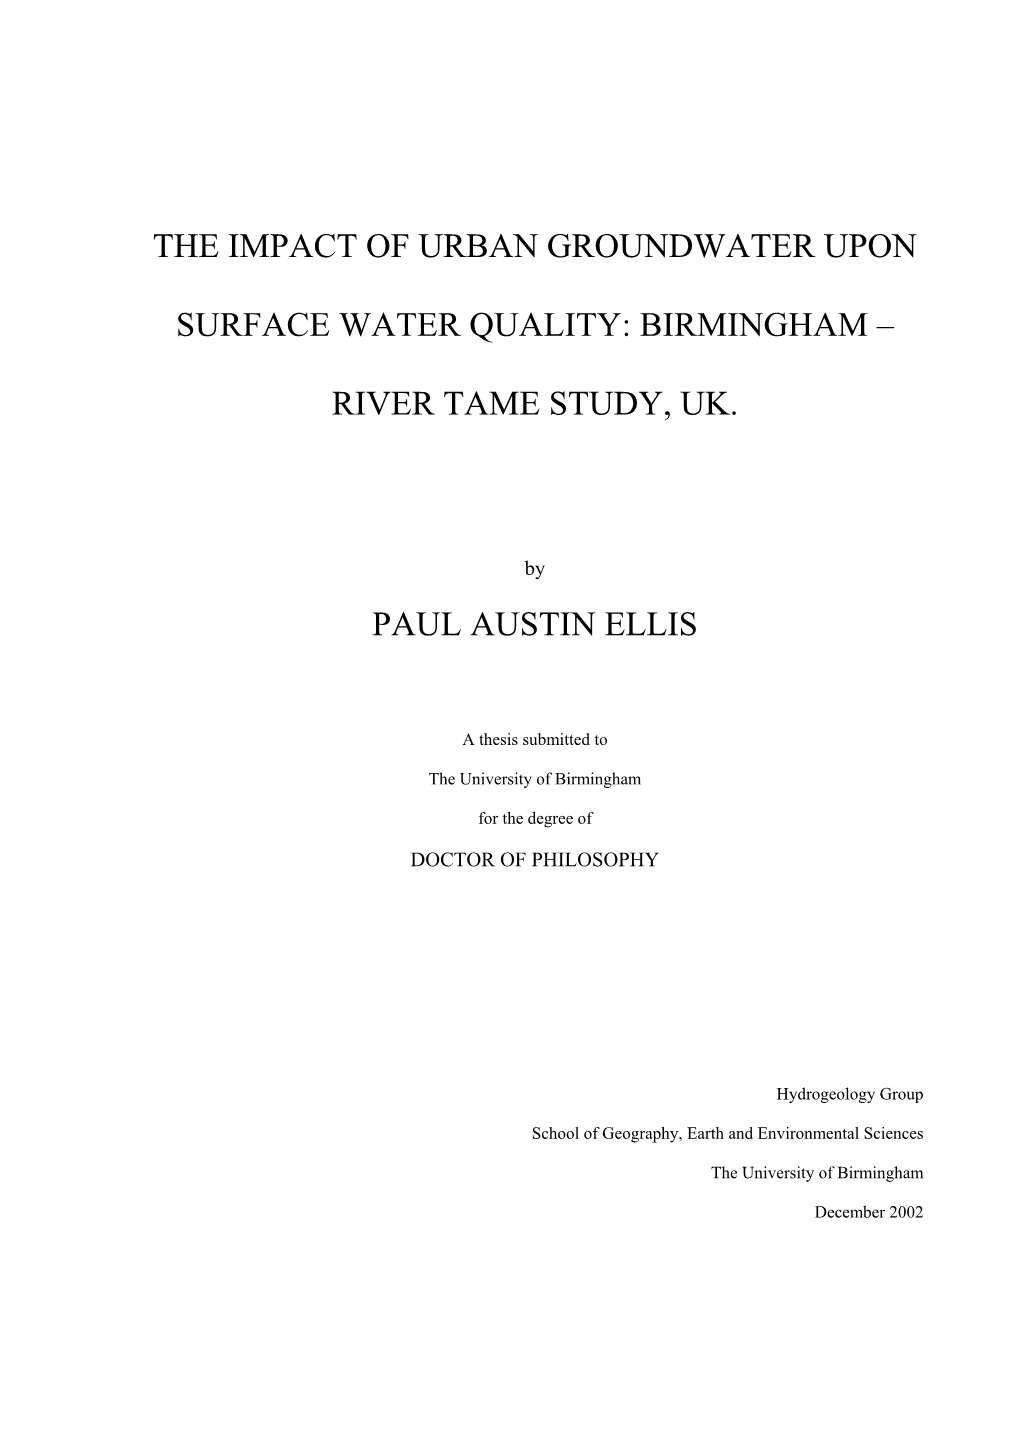 The Impact of Urban Groundwater Upon Surface Water Quality